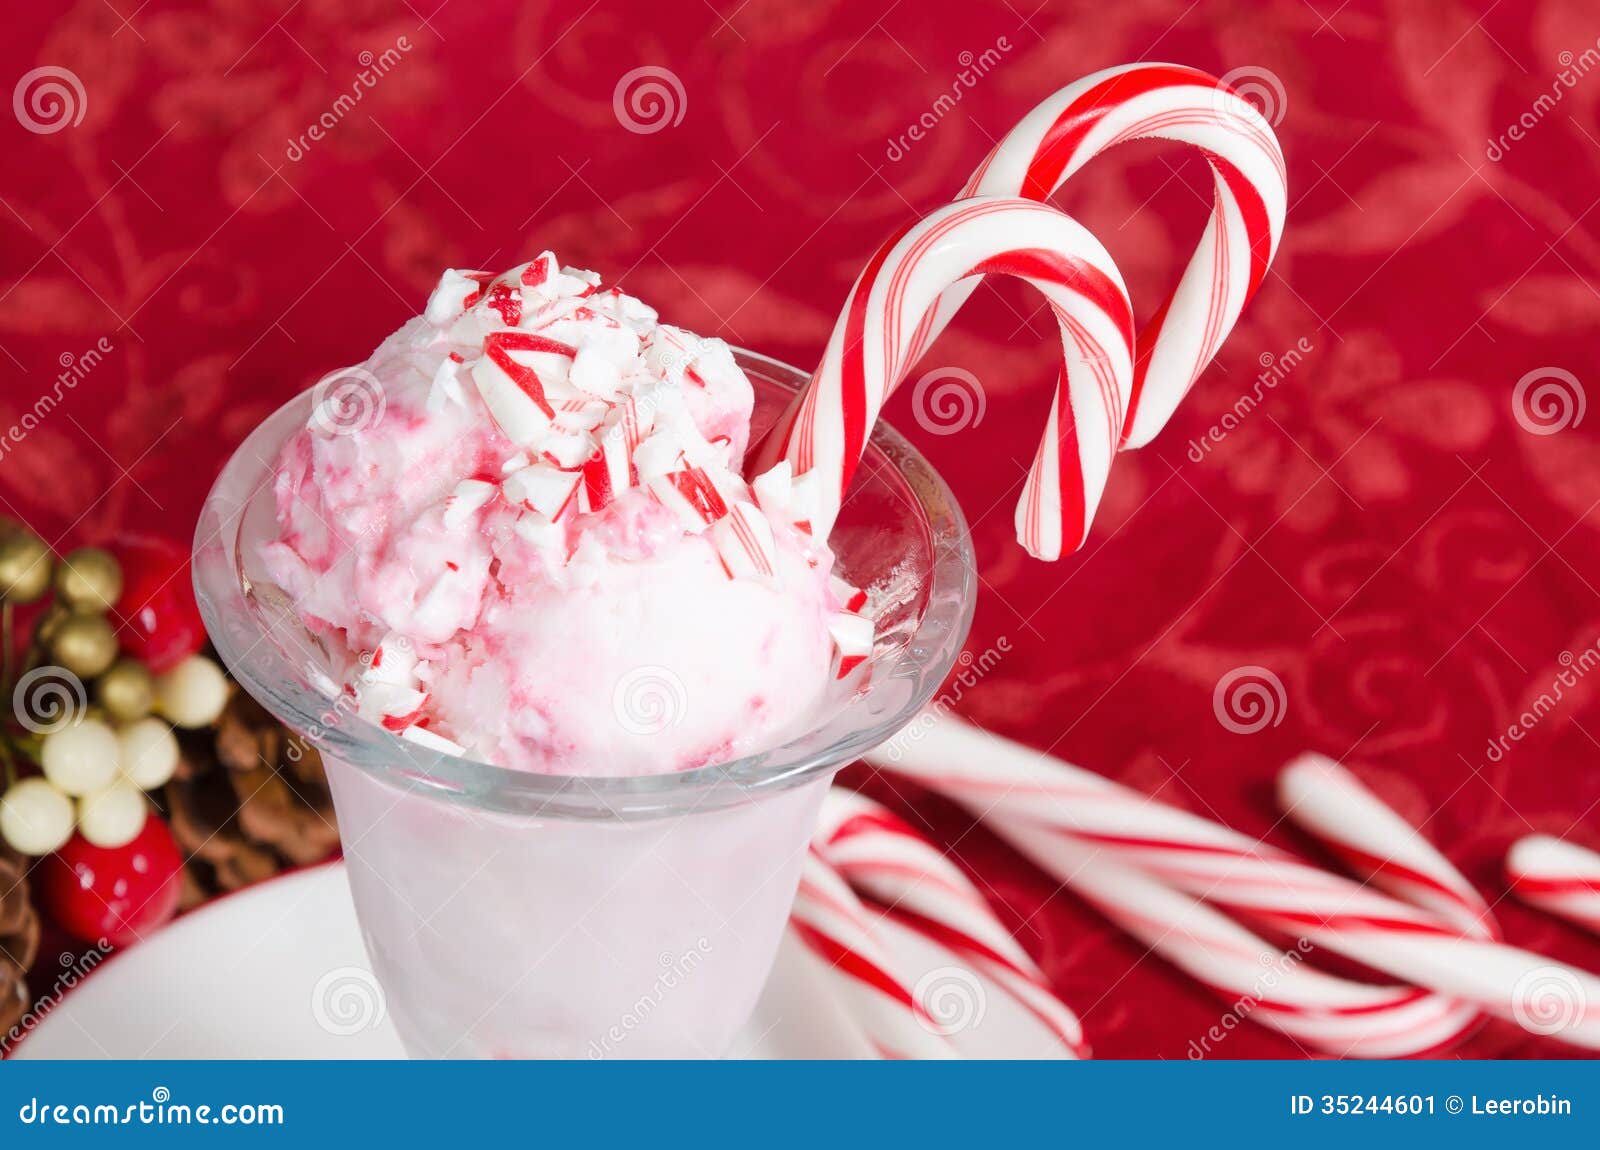 Page 8  Candy Cane Ice Cream Images - Free Download on Freepik